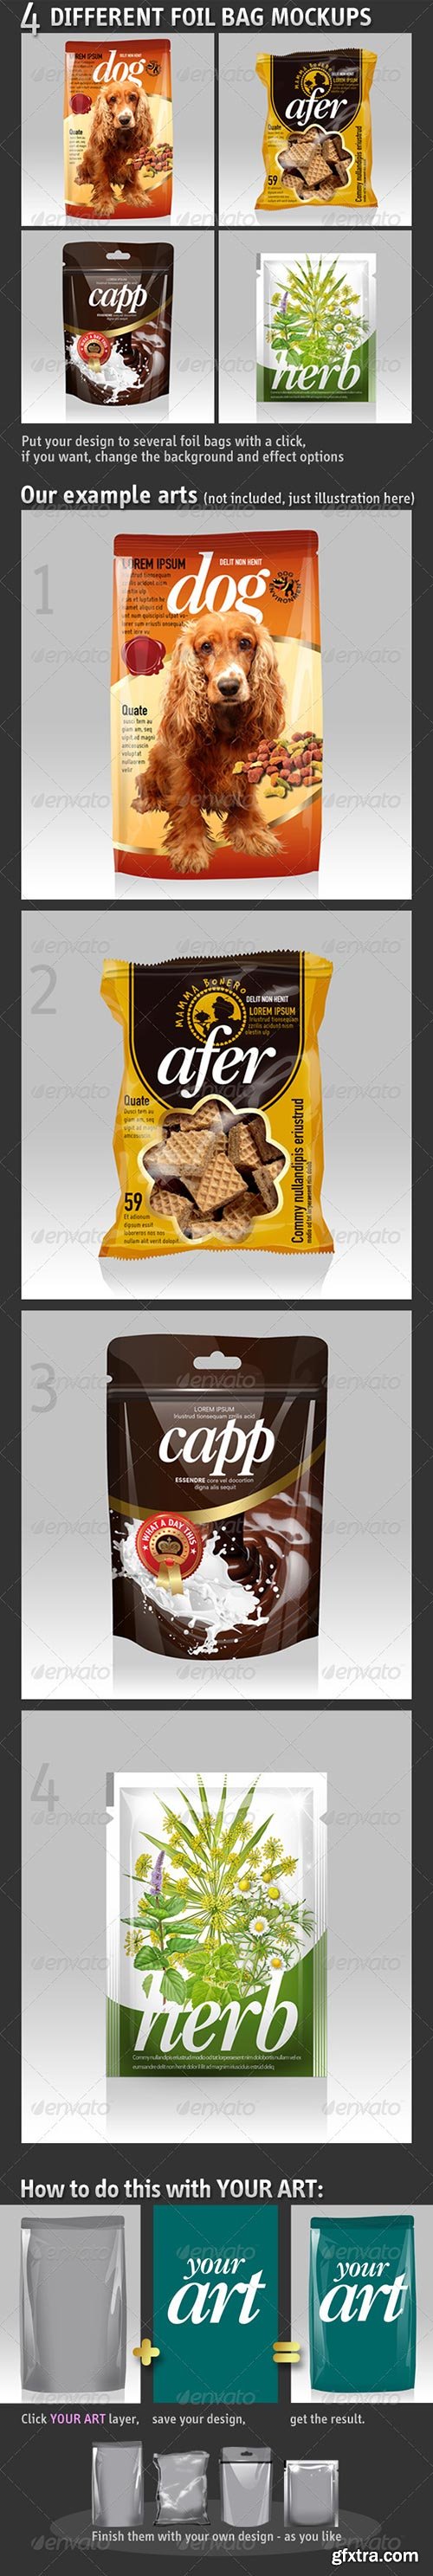 GraphicRiver - 4 Different Foil Bags Packaging Mockups